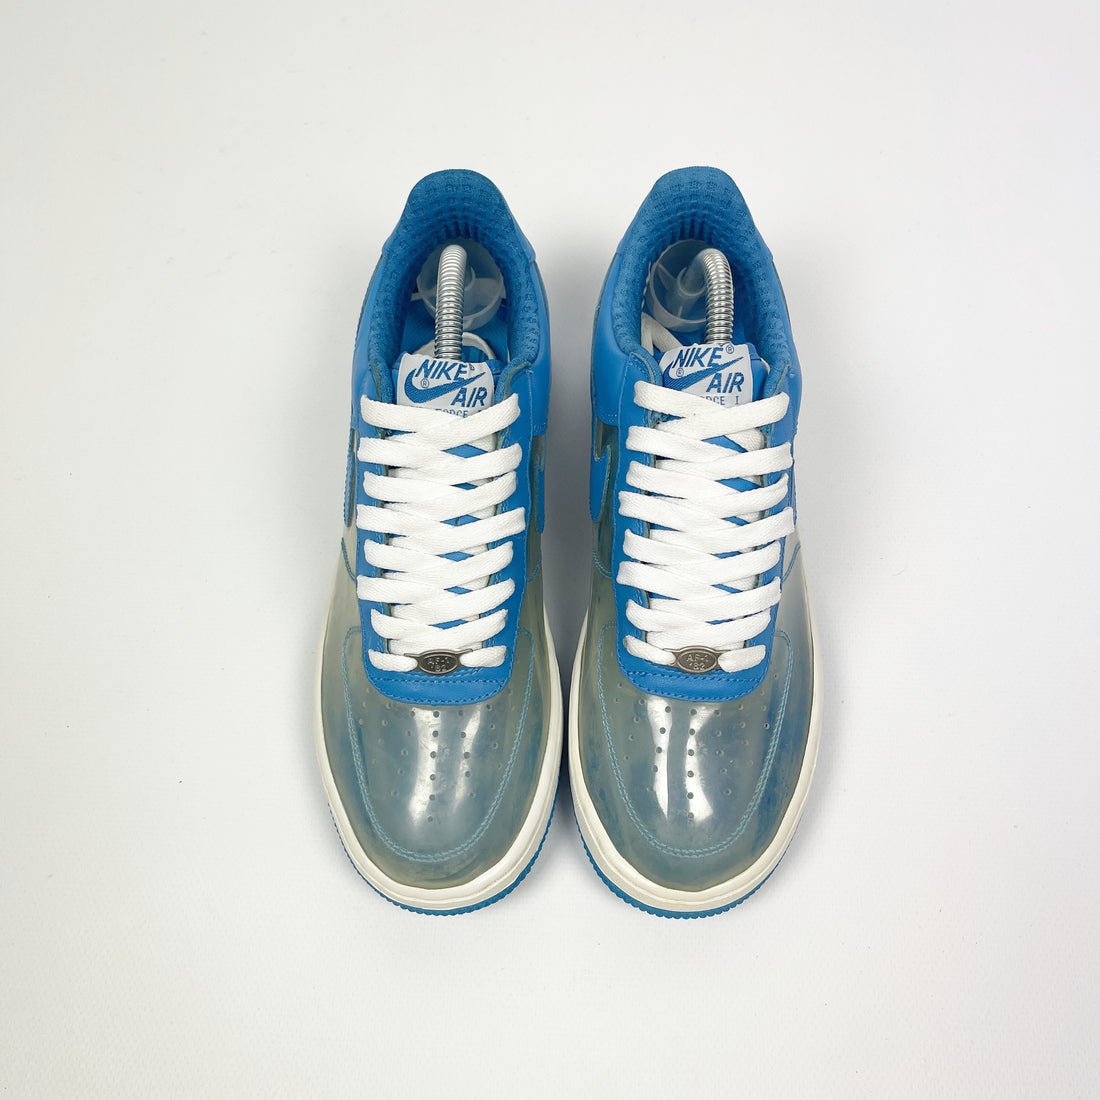 Nike Air force 1 'Fantastic 4' Invisible Woman 2006 - Vintagetts